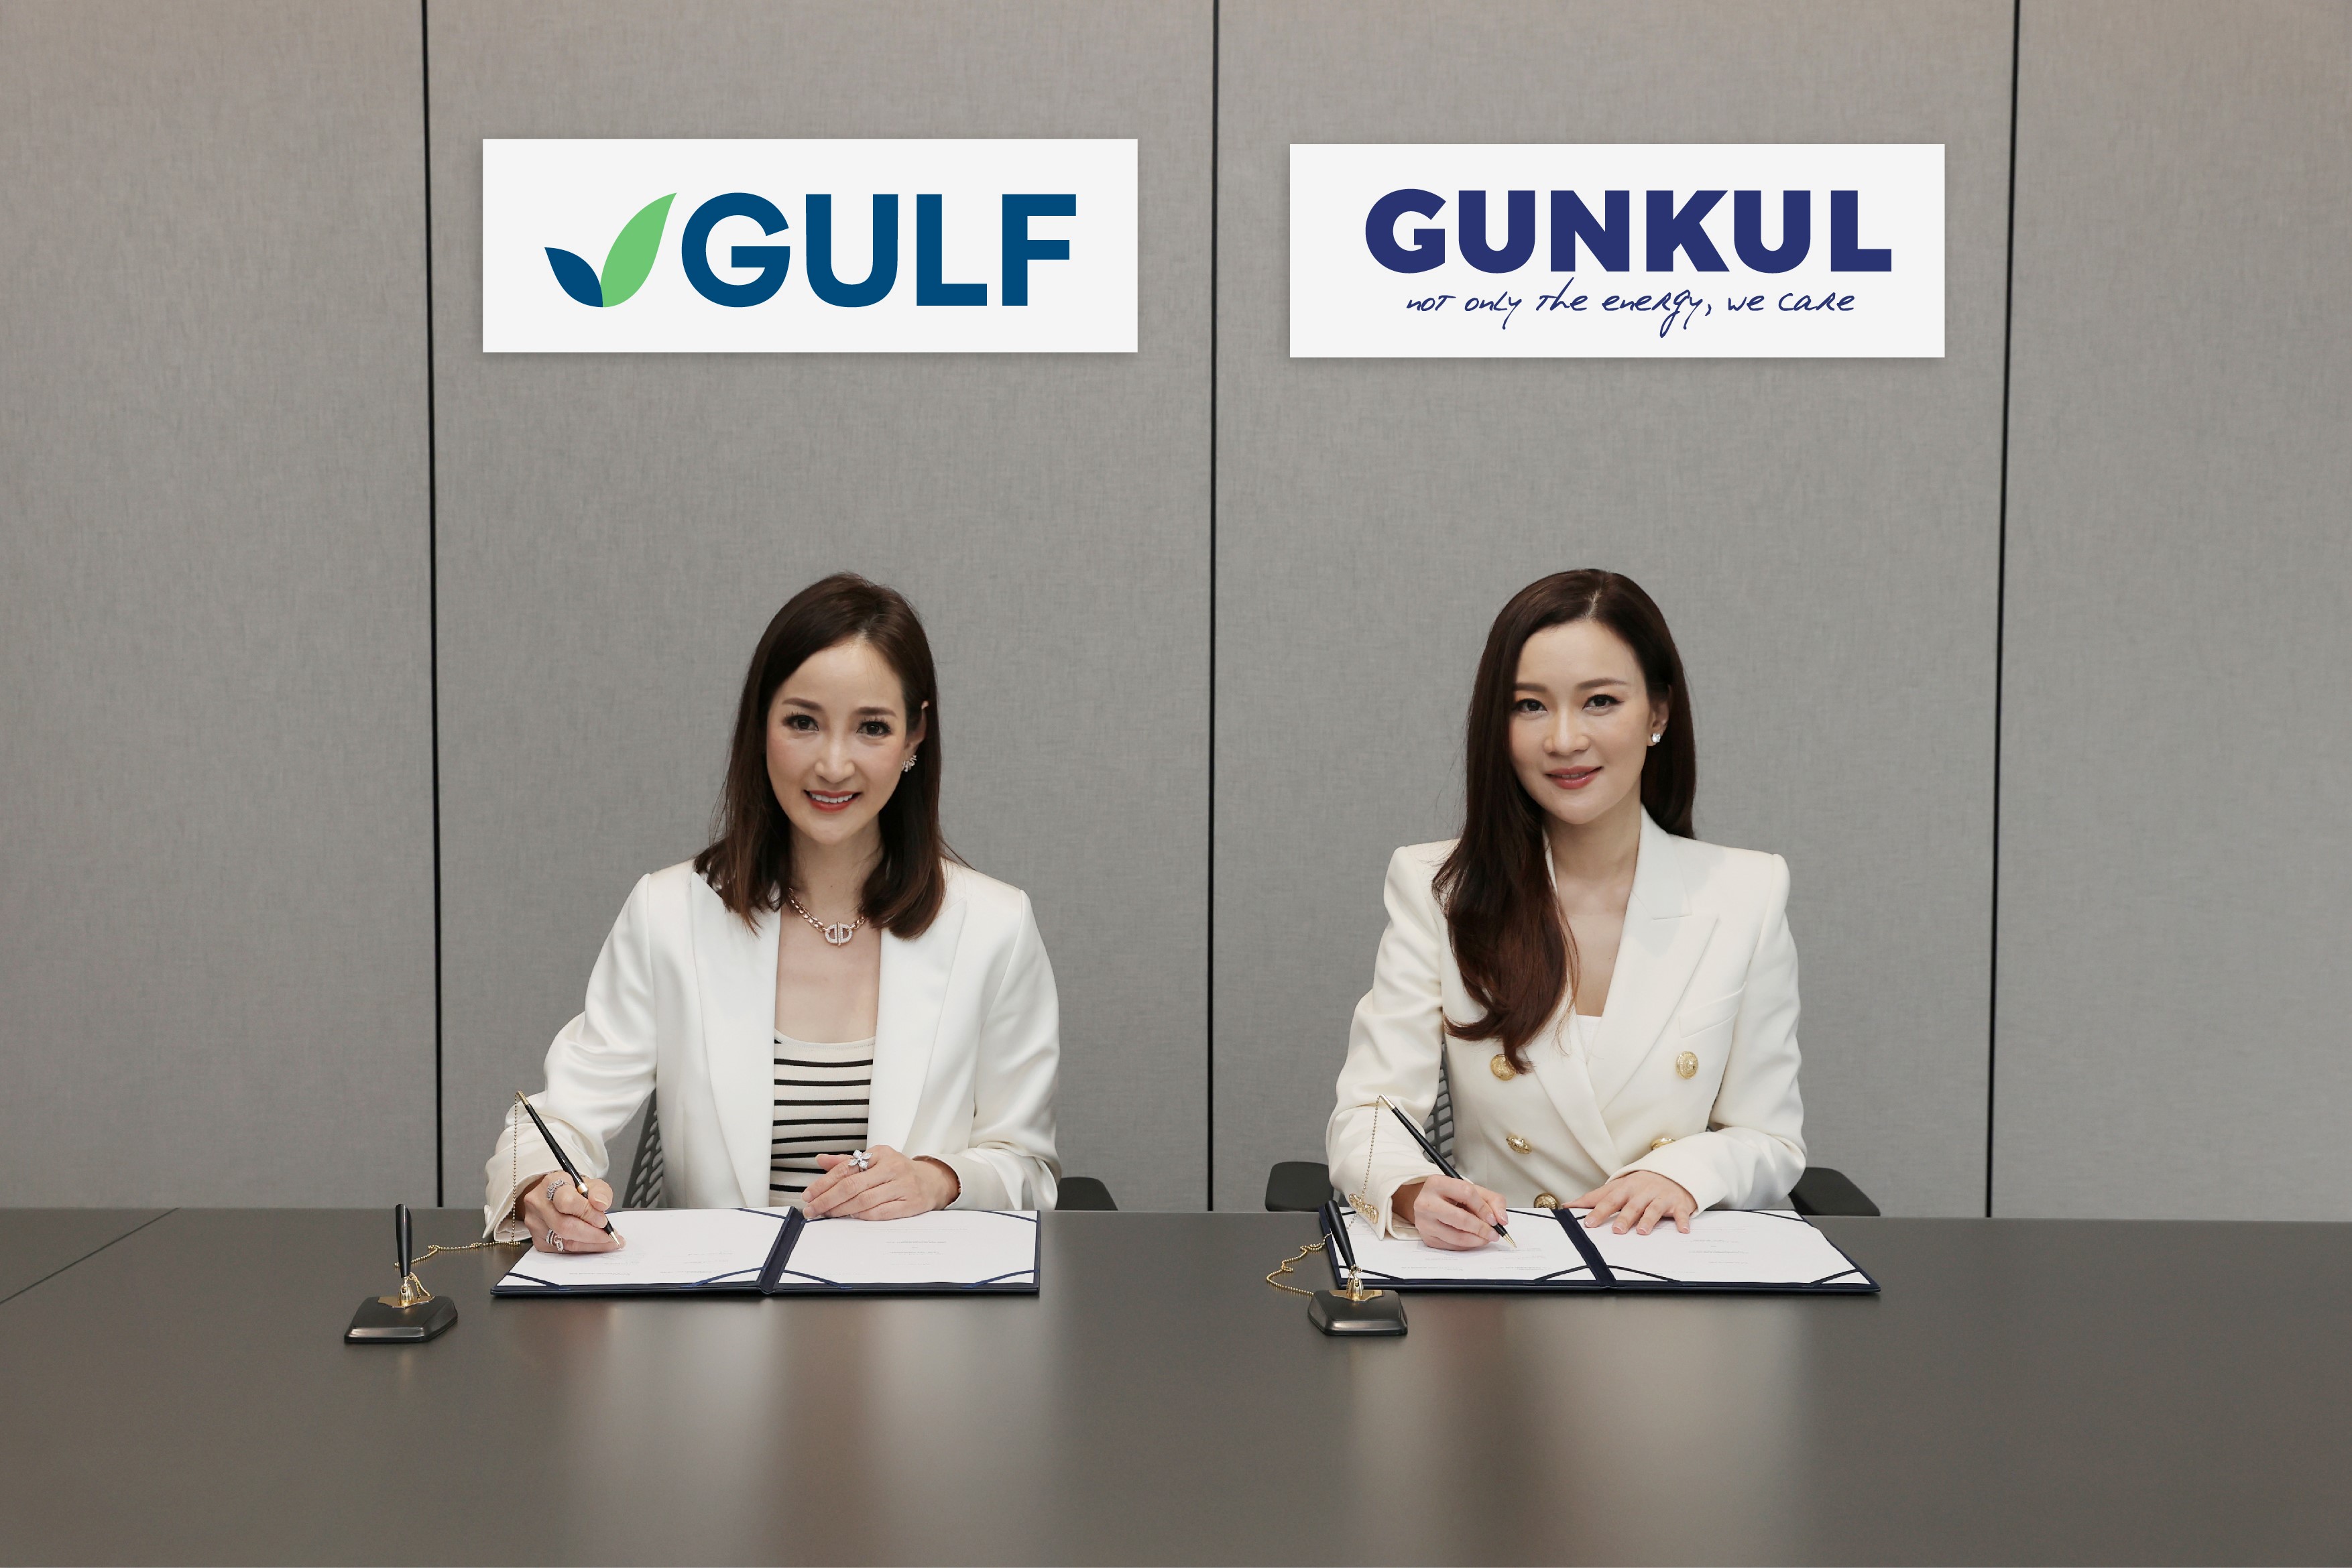 GULF joins forces with GUNKUL to jointly develop 1,000 MW of renewable energy within 5 years